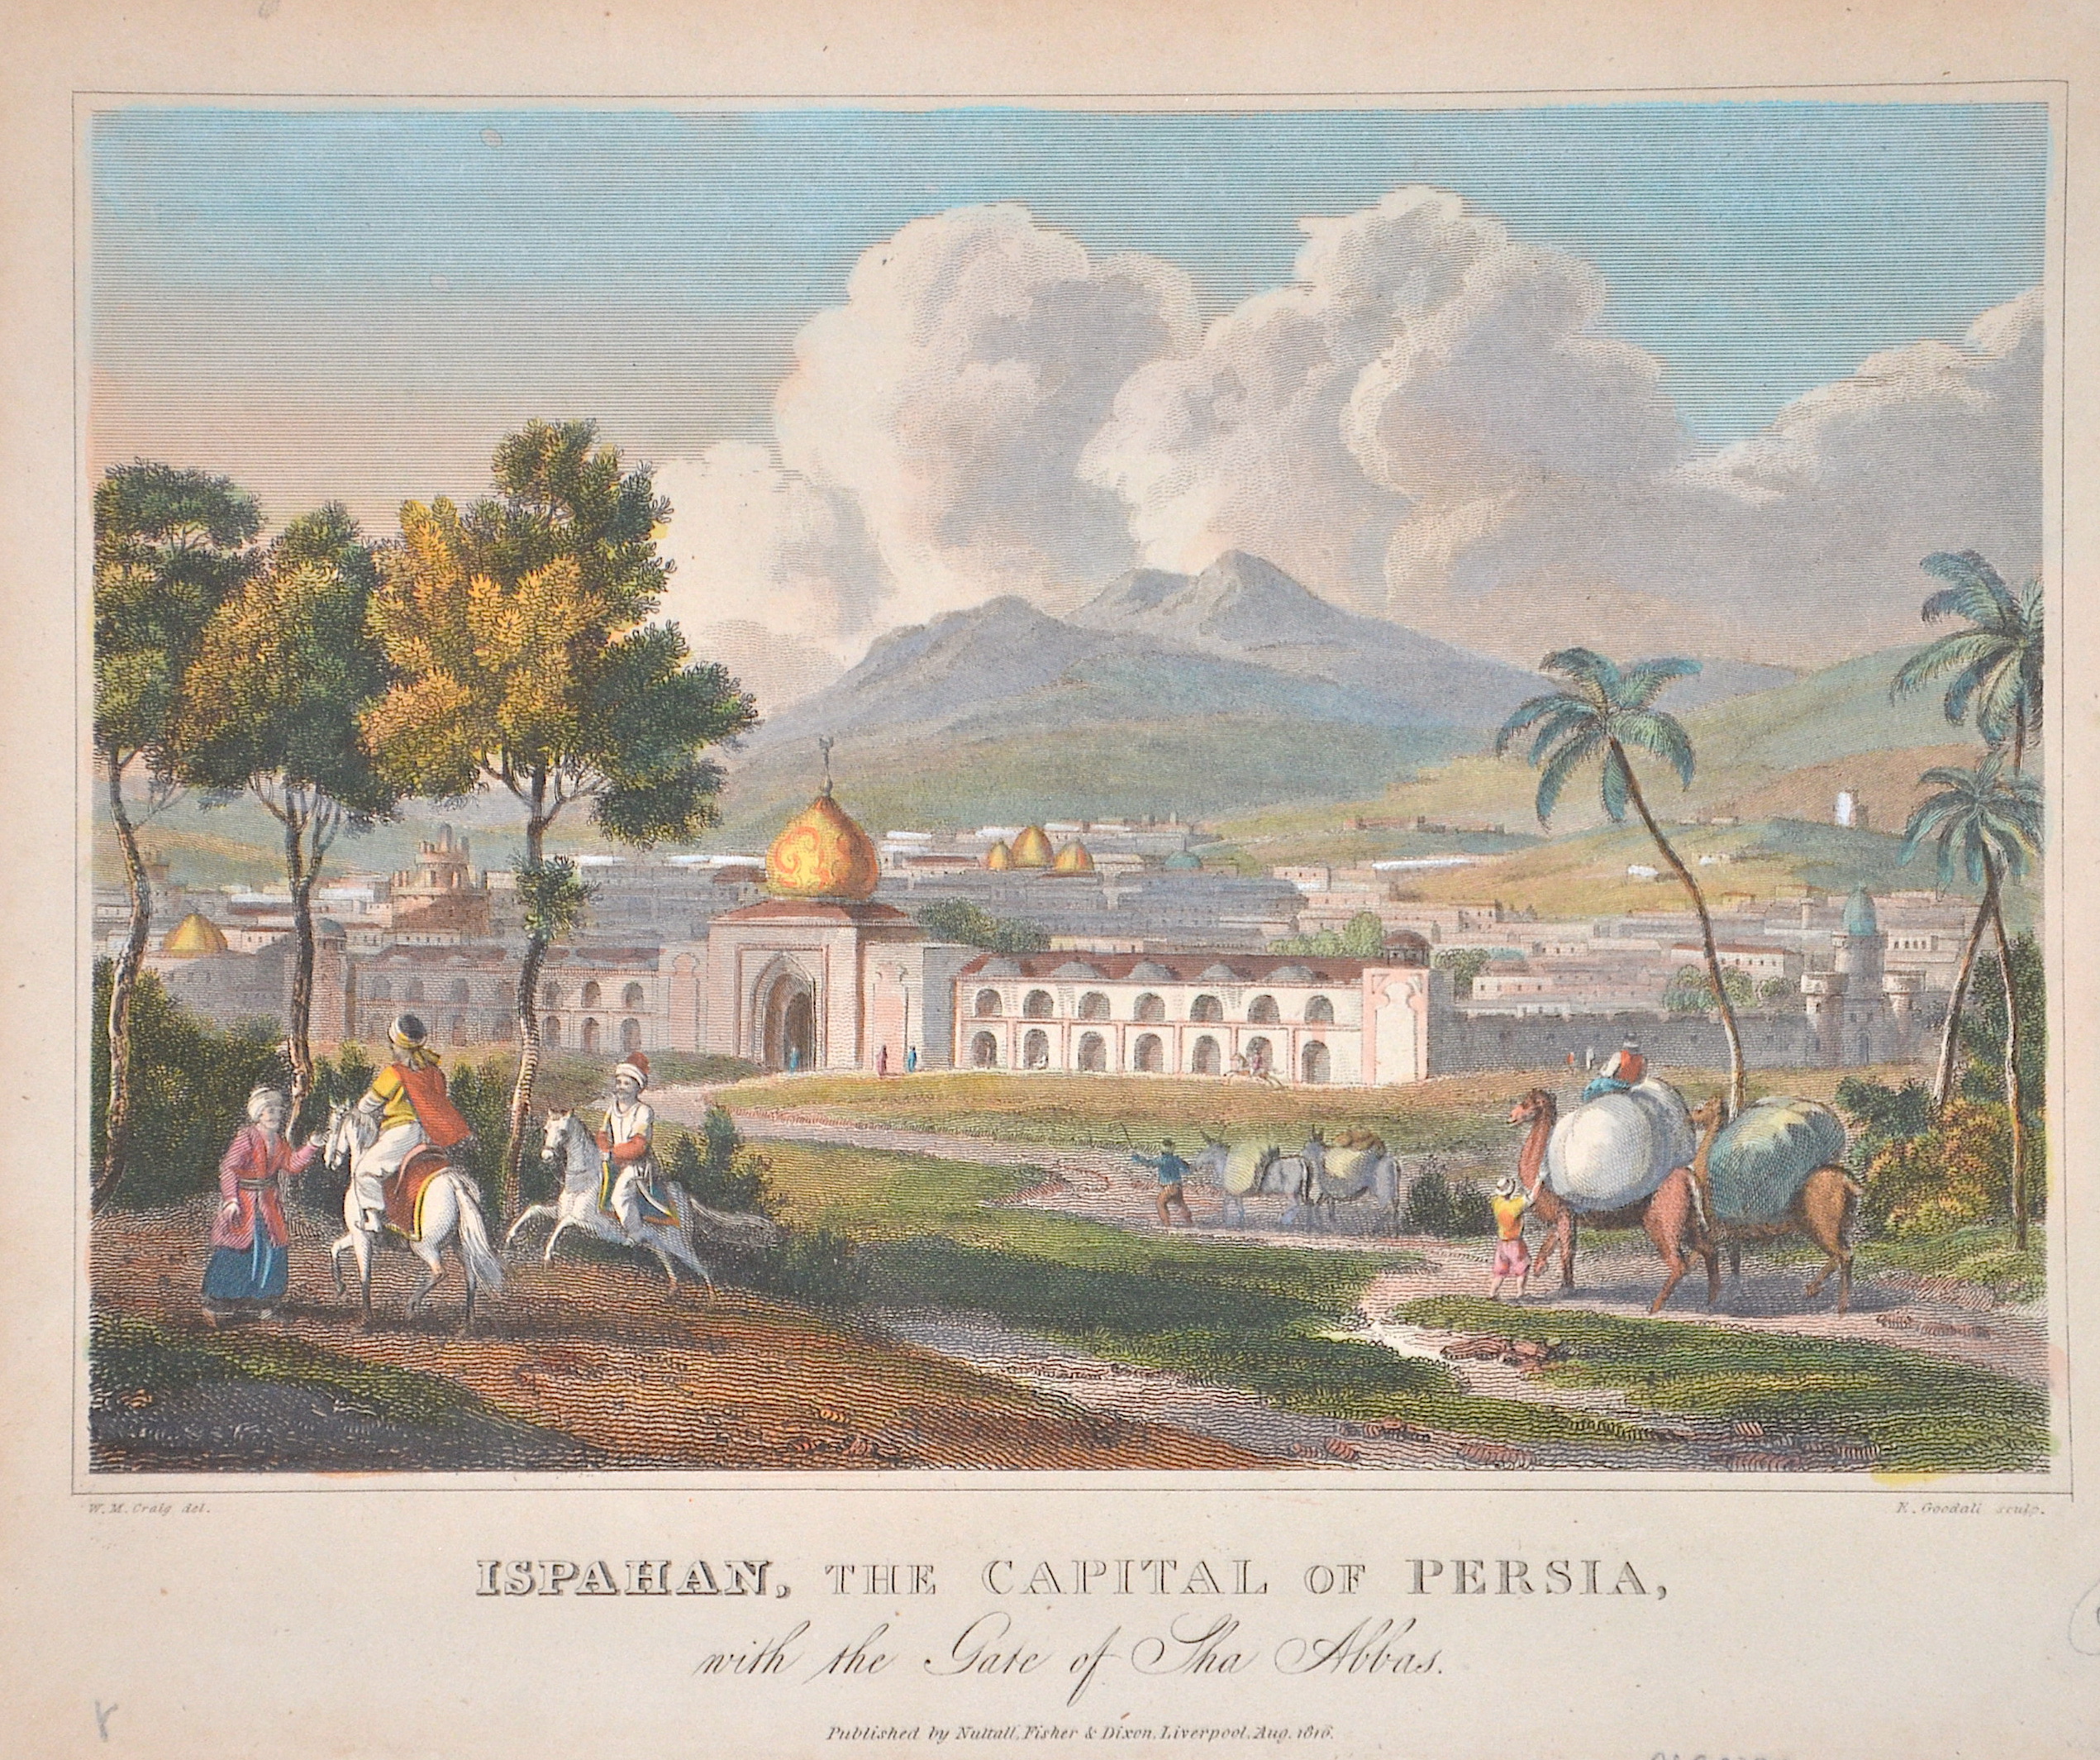 Goodall  Isphahan, The Capital of Persia with the gate Gate of the Sha Abbas